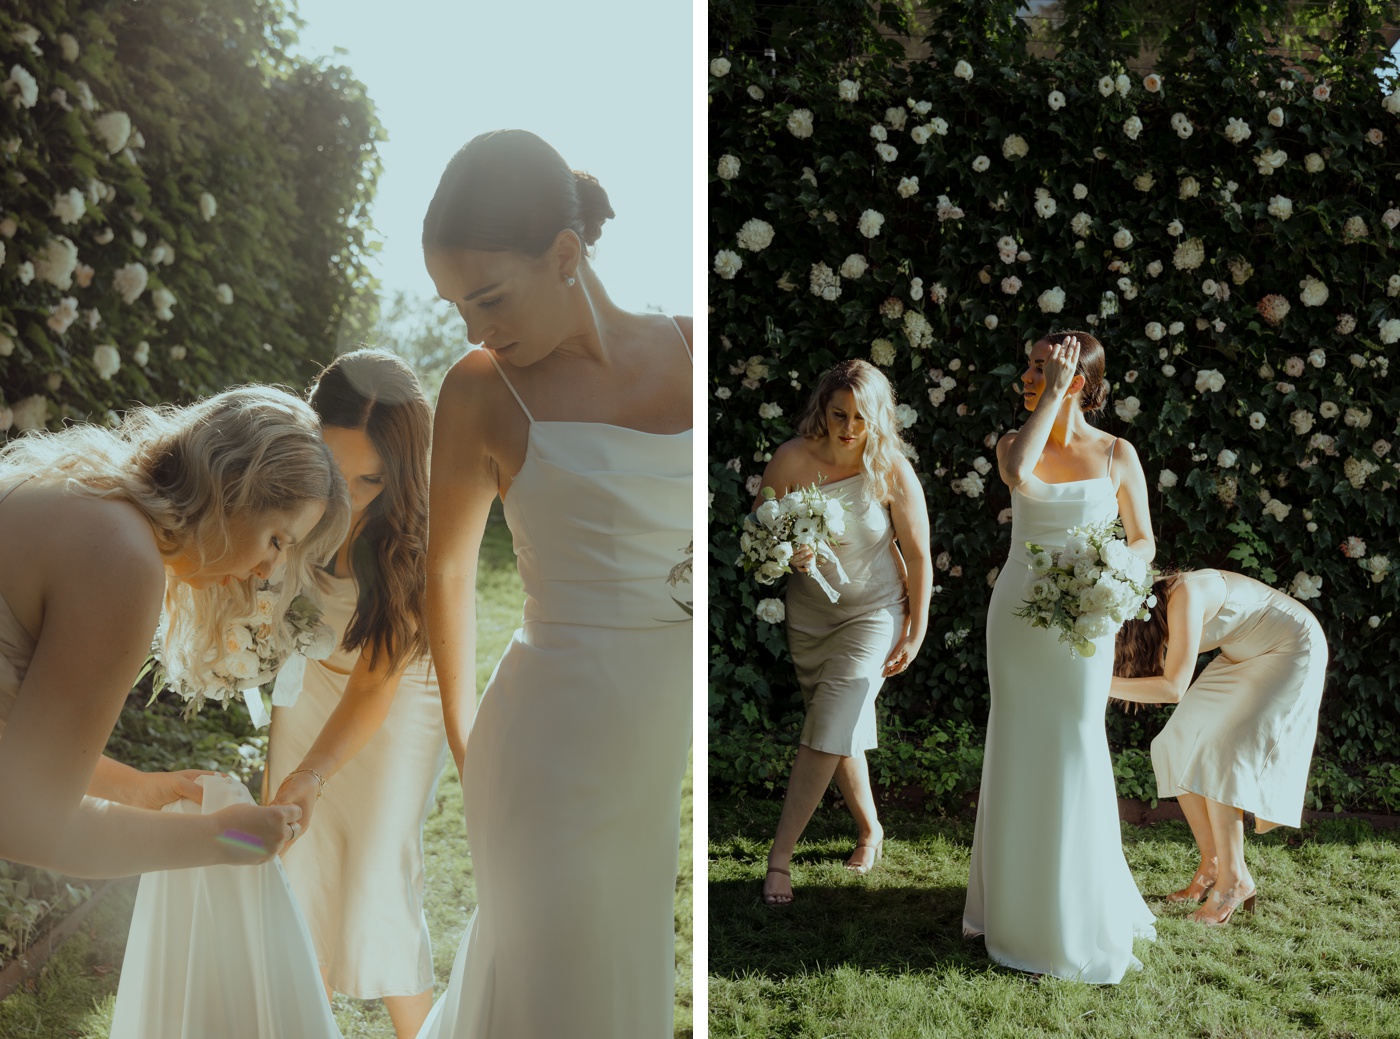 Bridal party portraits at a backyard wedding in Vermont